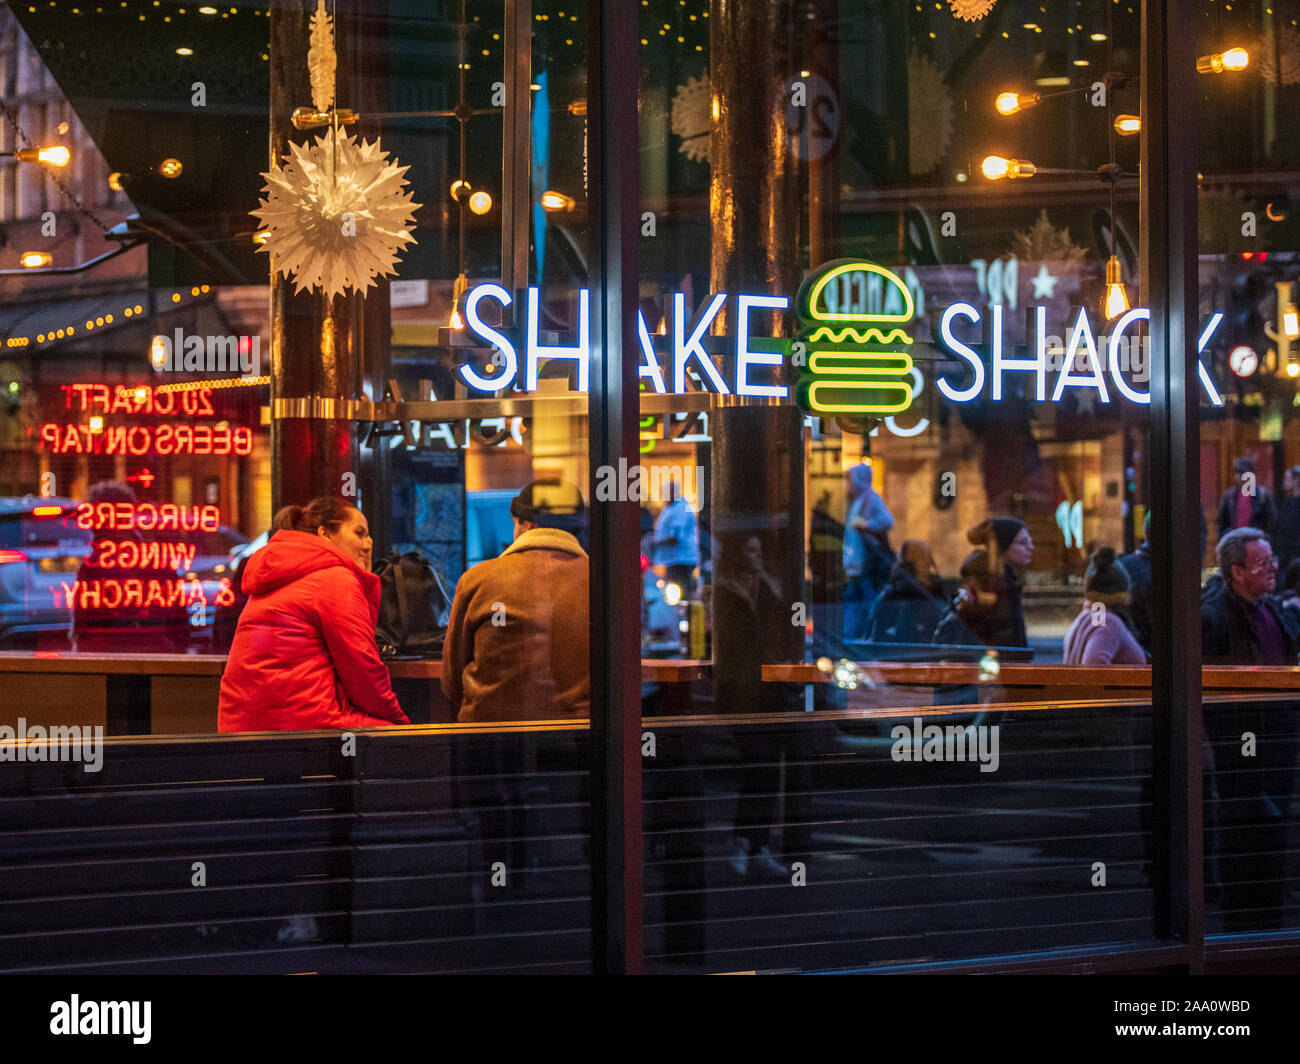 Shake Shack Soho London - London Soho branch of the US fast food restaurant chain on Cambridge Circus in London West End. Stock Photo